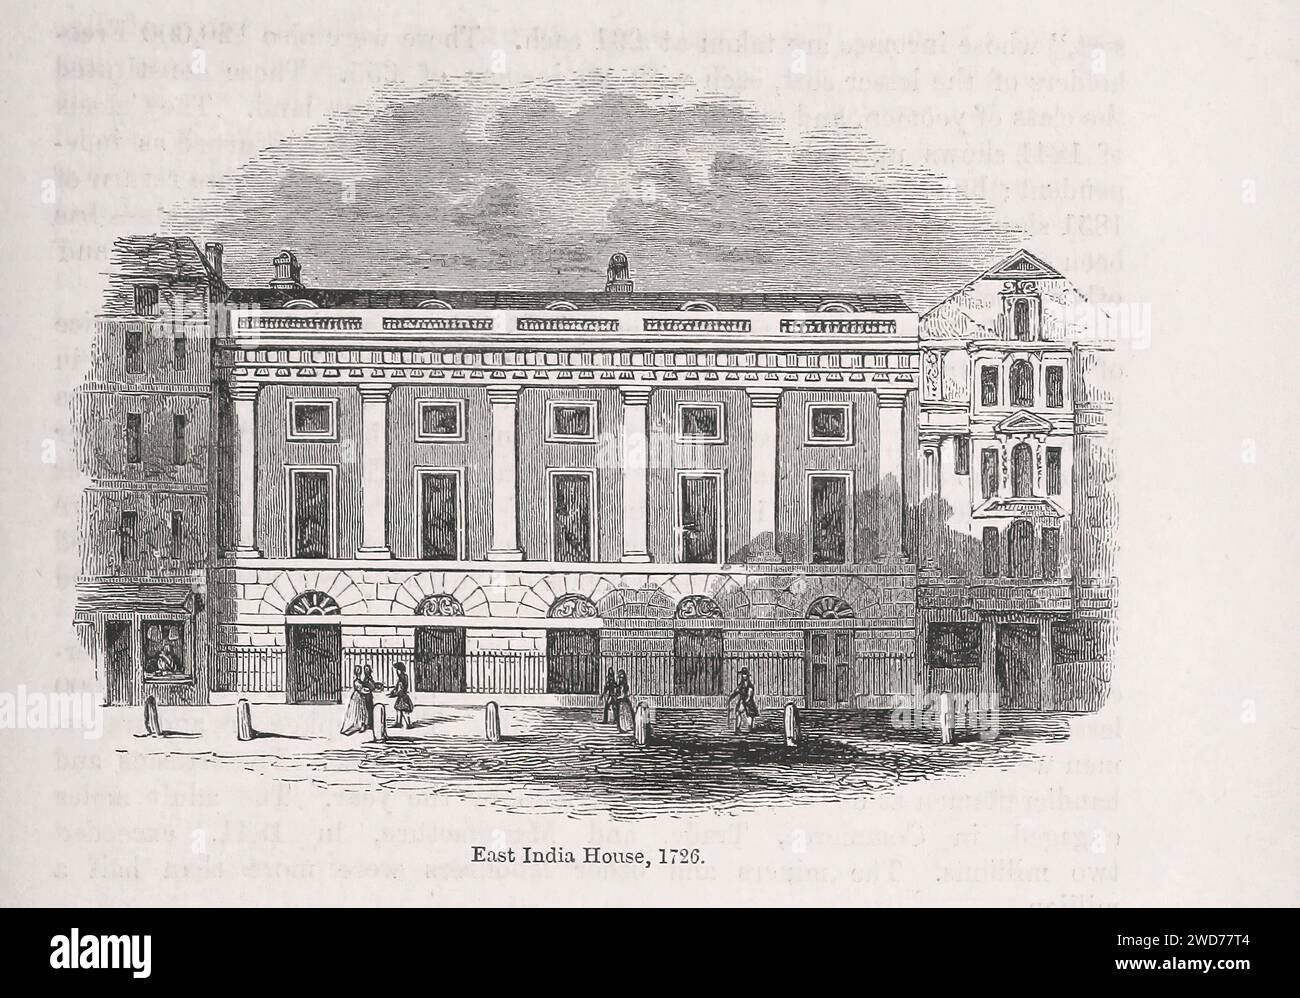 EAST INDIA HOUSE, 1726. east india house; 1726; architecture; historical; london; facade; urban  - Image taken from 'The Popular History Of England: An Illustrated History Of Society And Government From The Earliest Period To Our OwnTimes By Charles KNIGHT - London. Bradbury and Evans. 1856-1862 Stock Photo